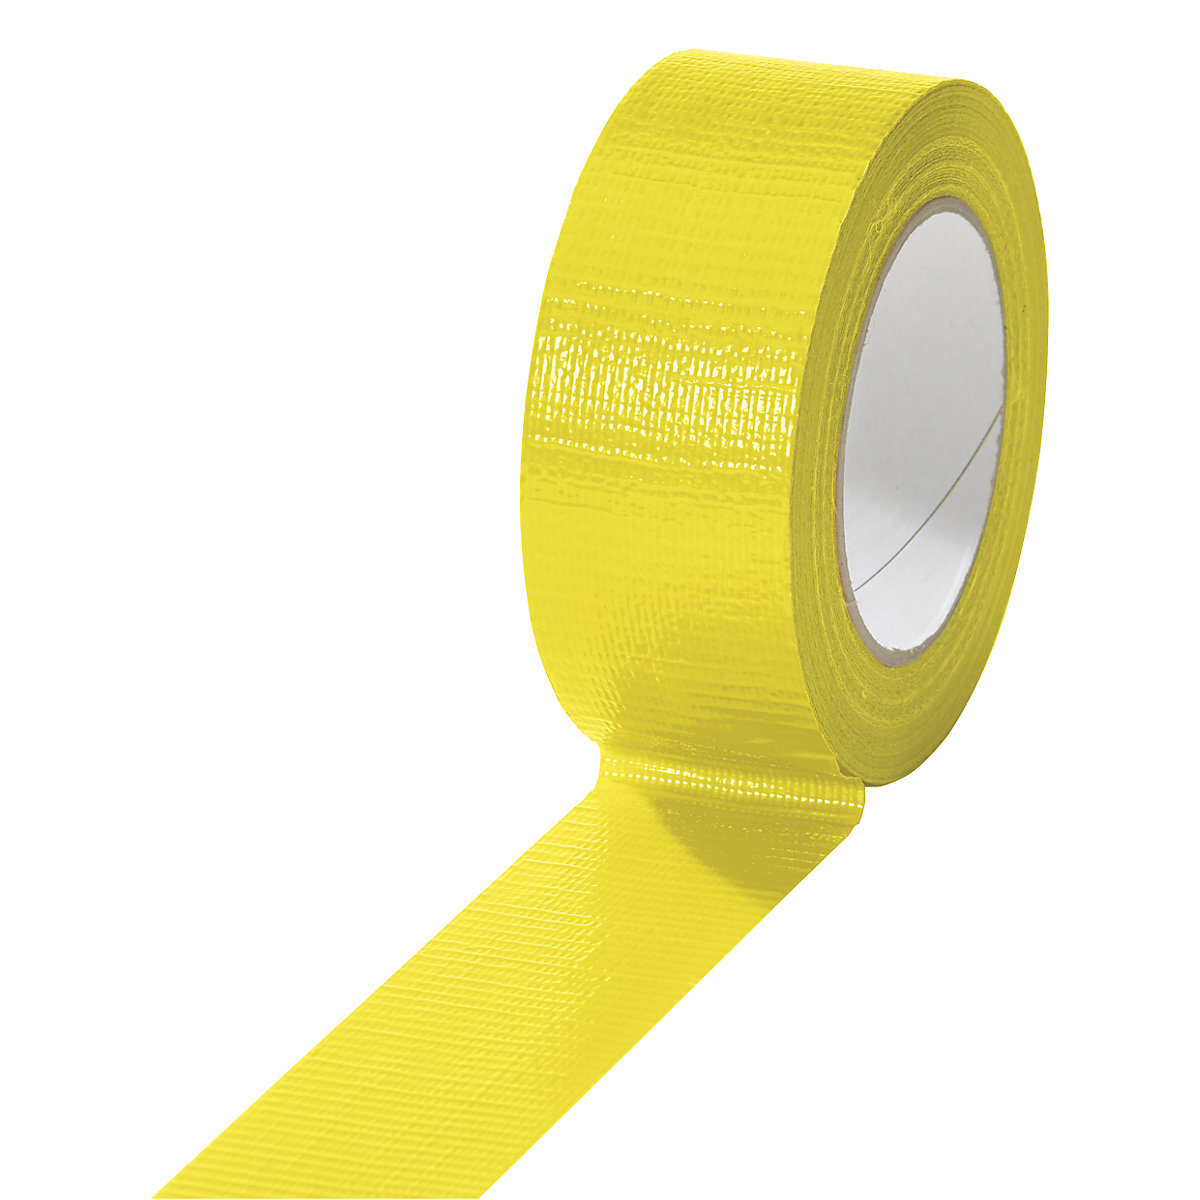 Fabric tape, in different colours, pack of 24 rolls, yellow, tape width 38 mm-12